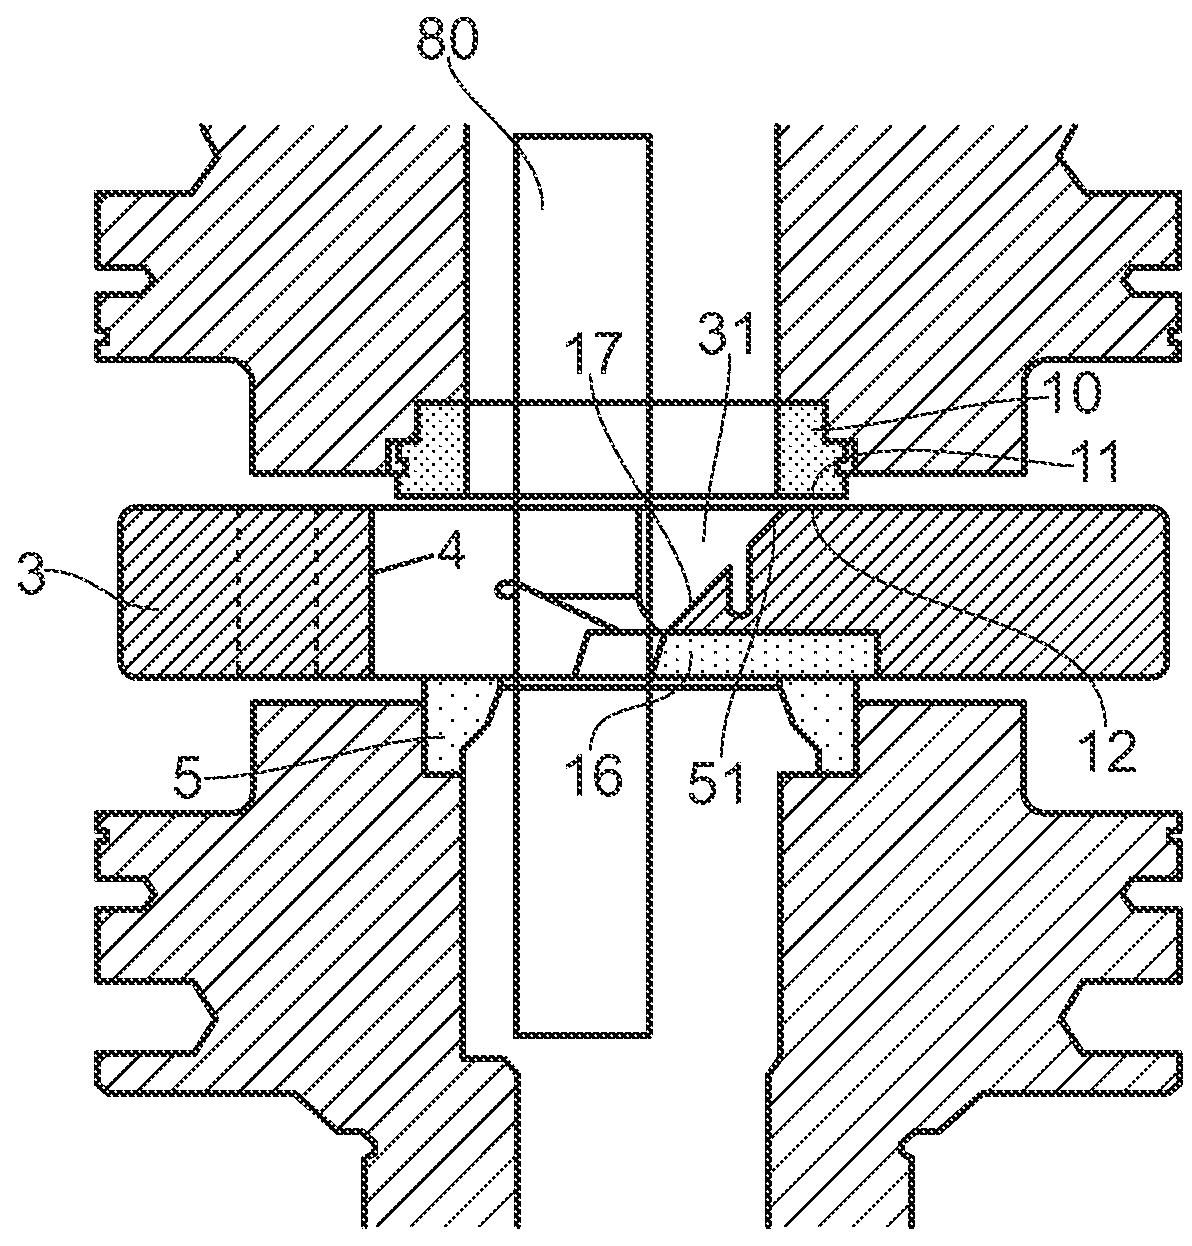 Gate valve assembly comprising a support member